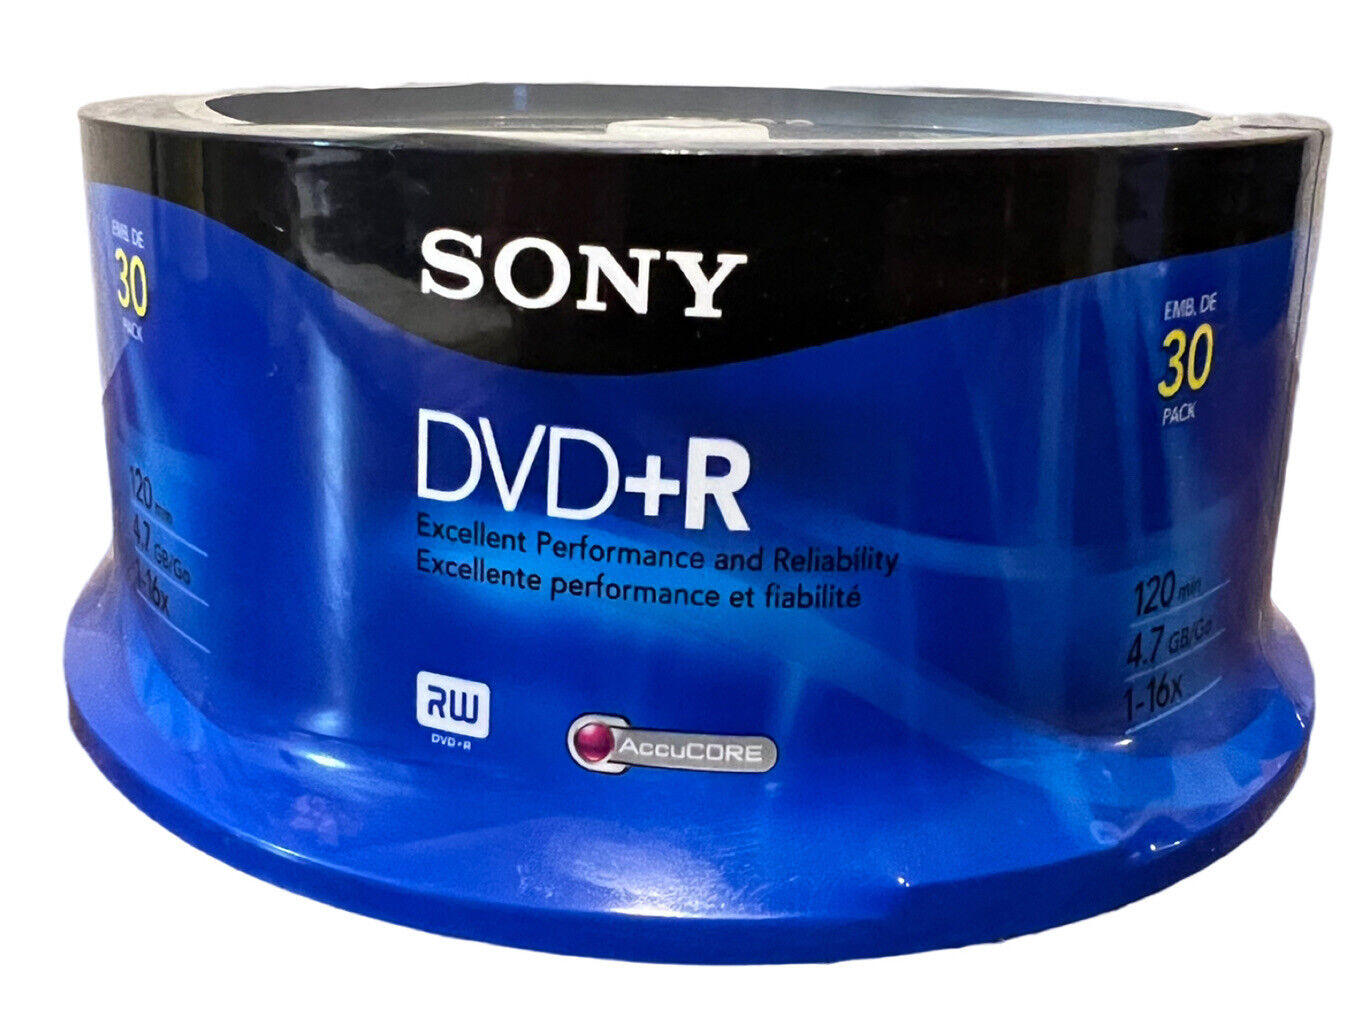 Sony DVD+R 30DPR47RS4 Recordable Media 1X - 16X 120 min 4.7GB 30-Pack Spindle